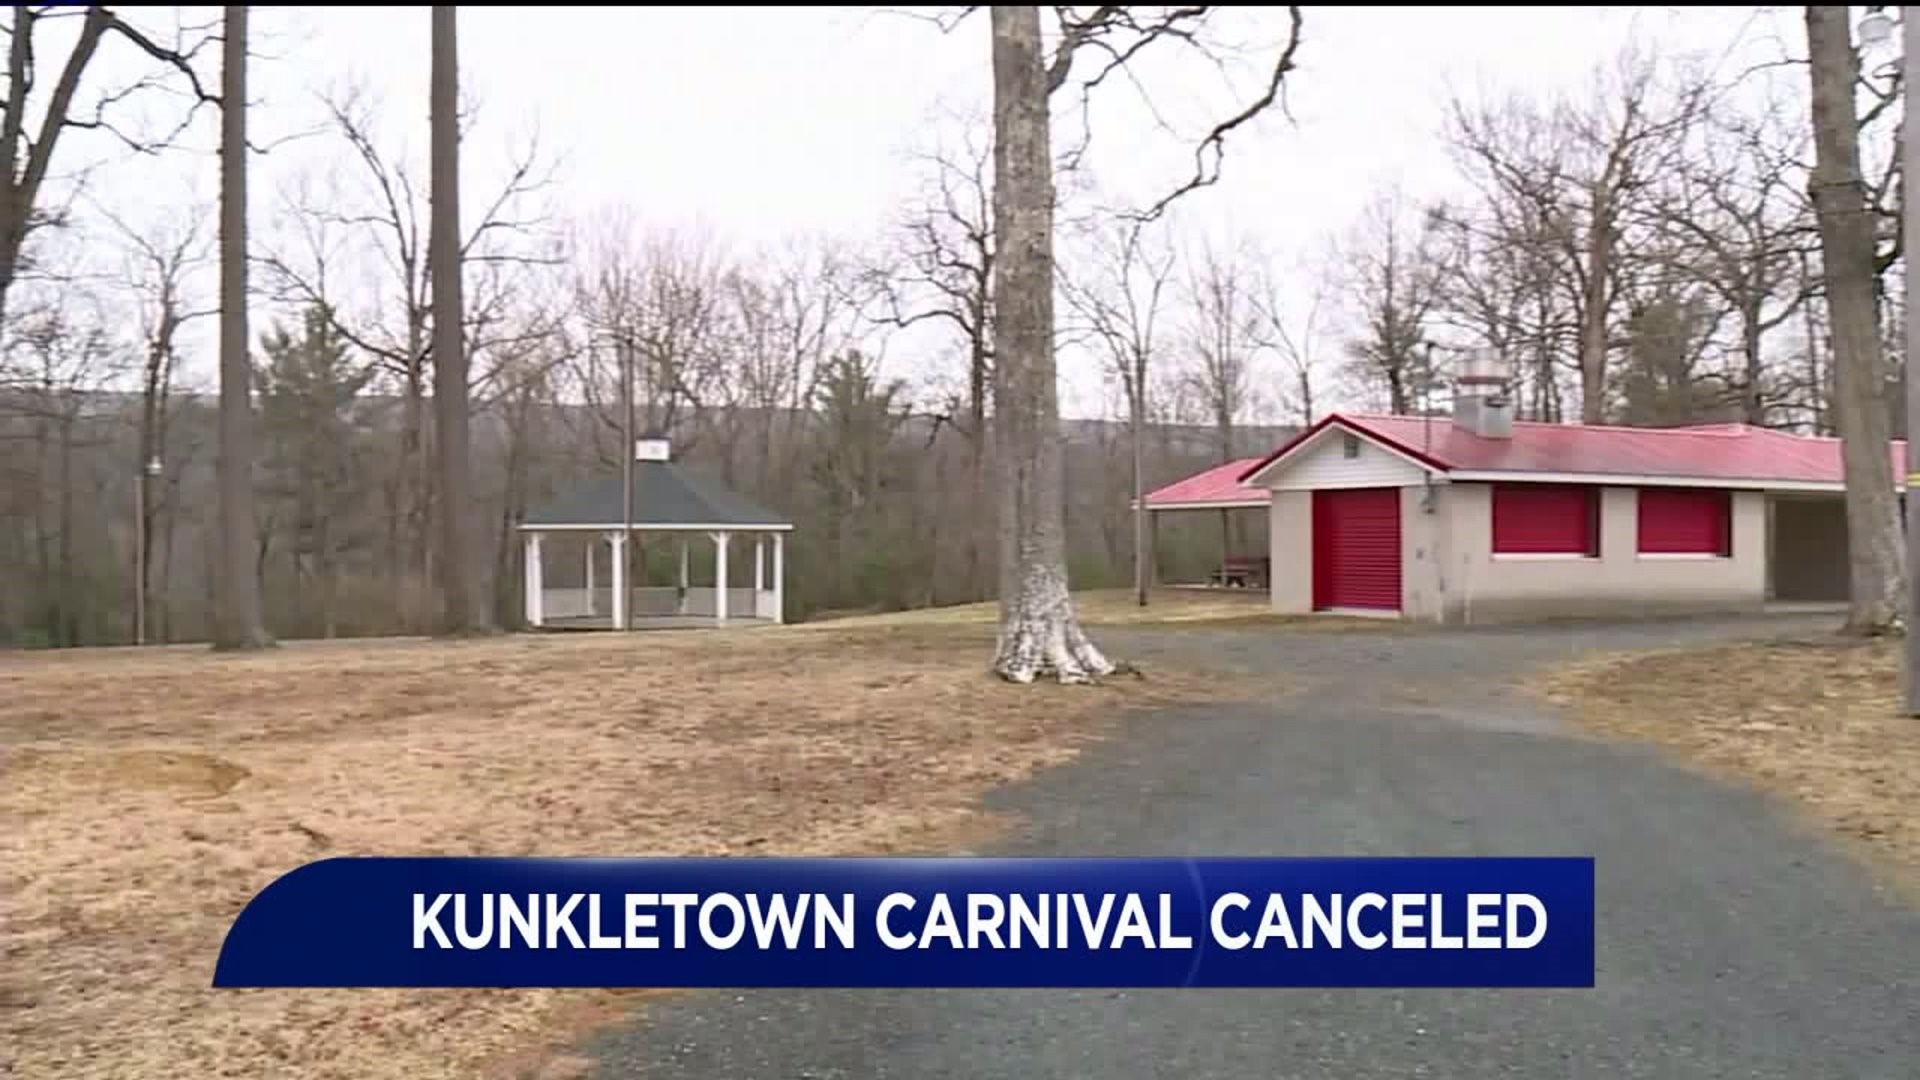 Annual Carnival in Kunkletown Canceled